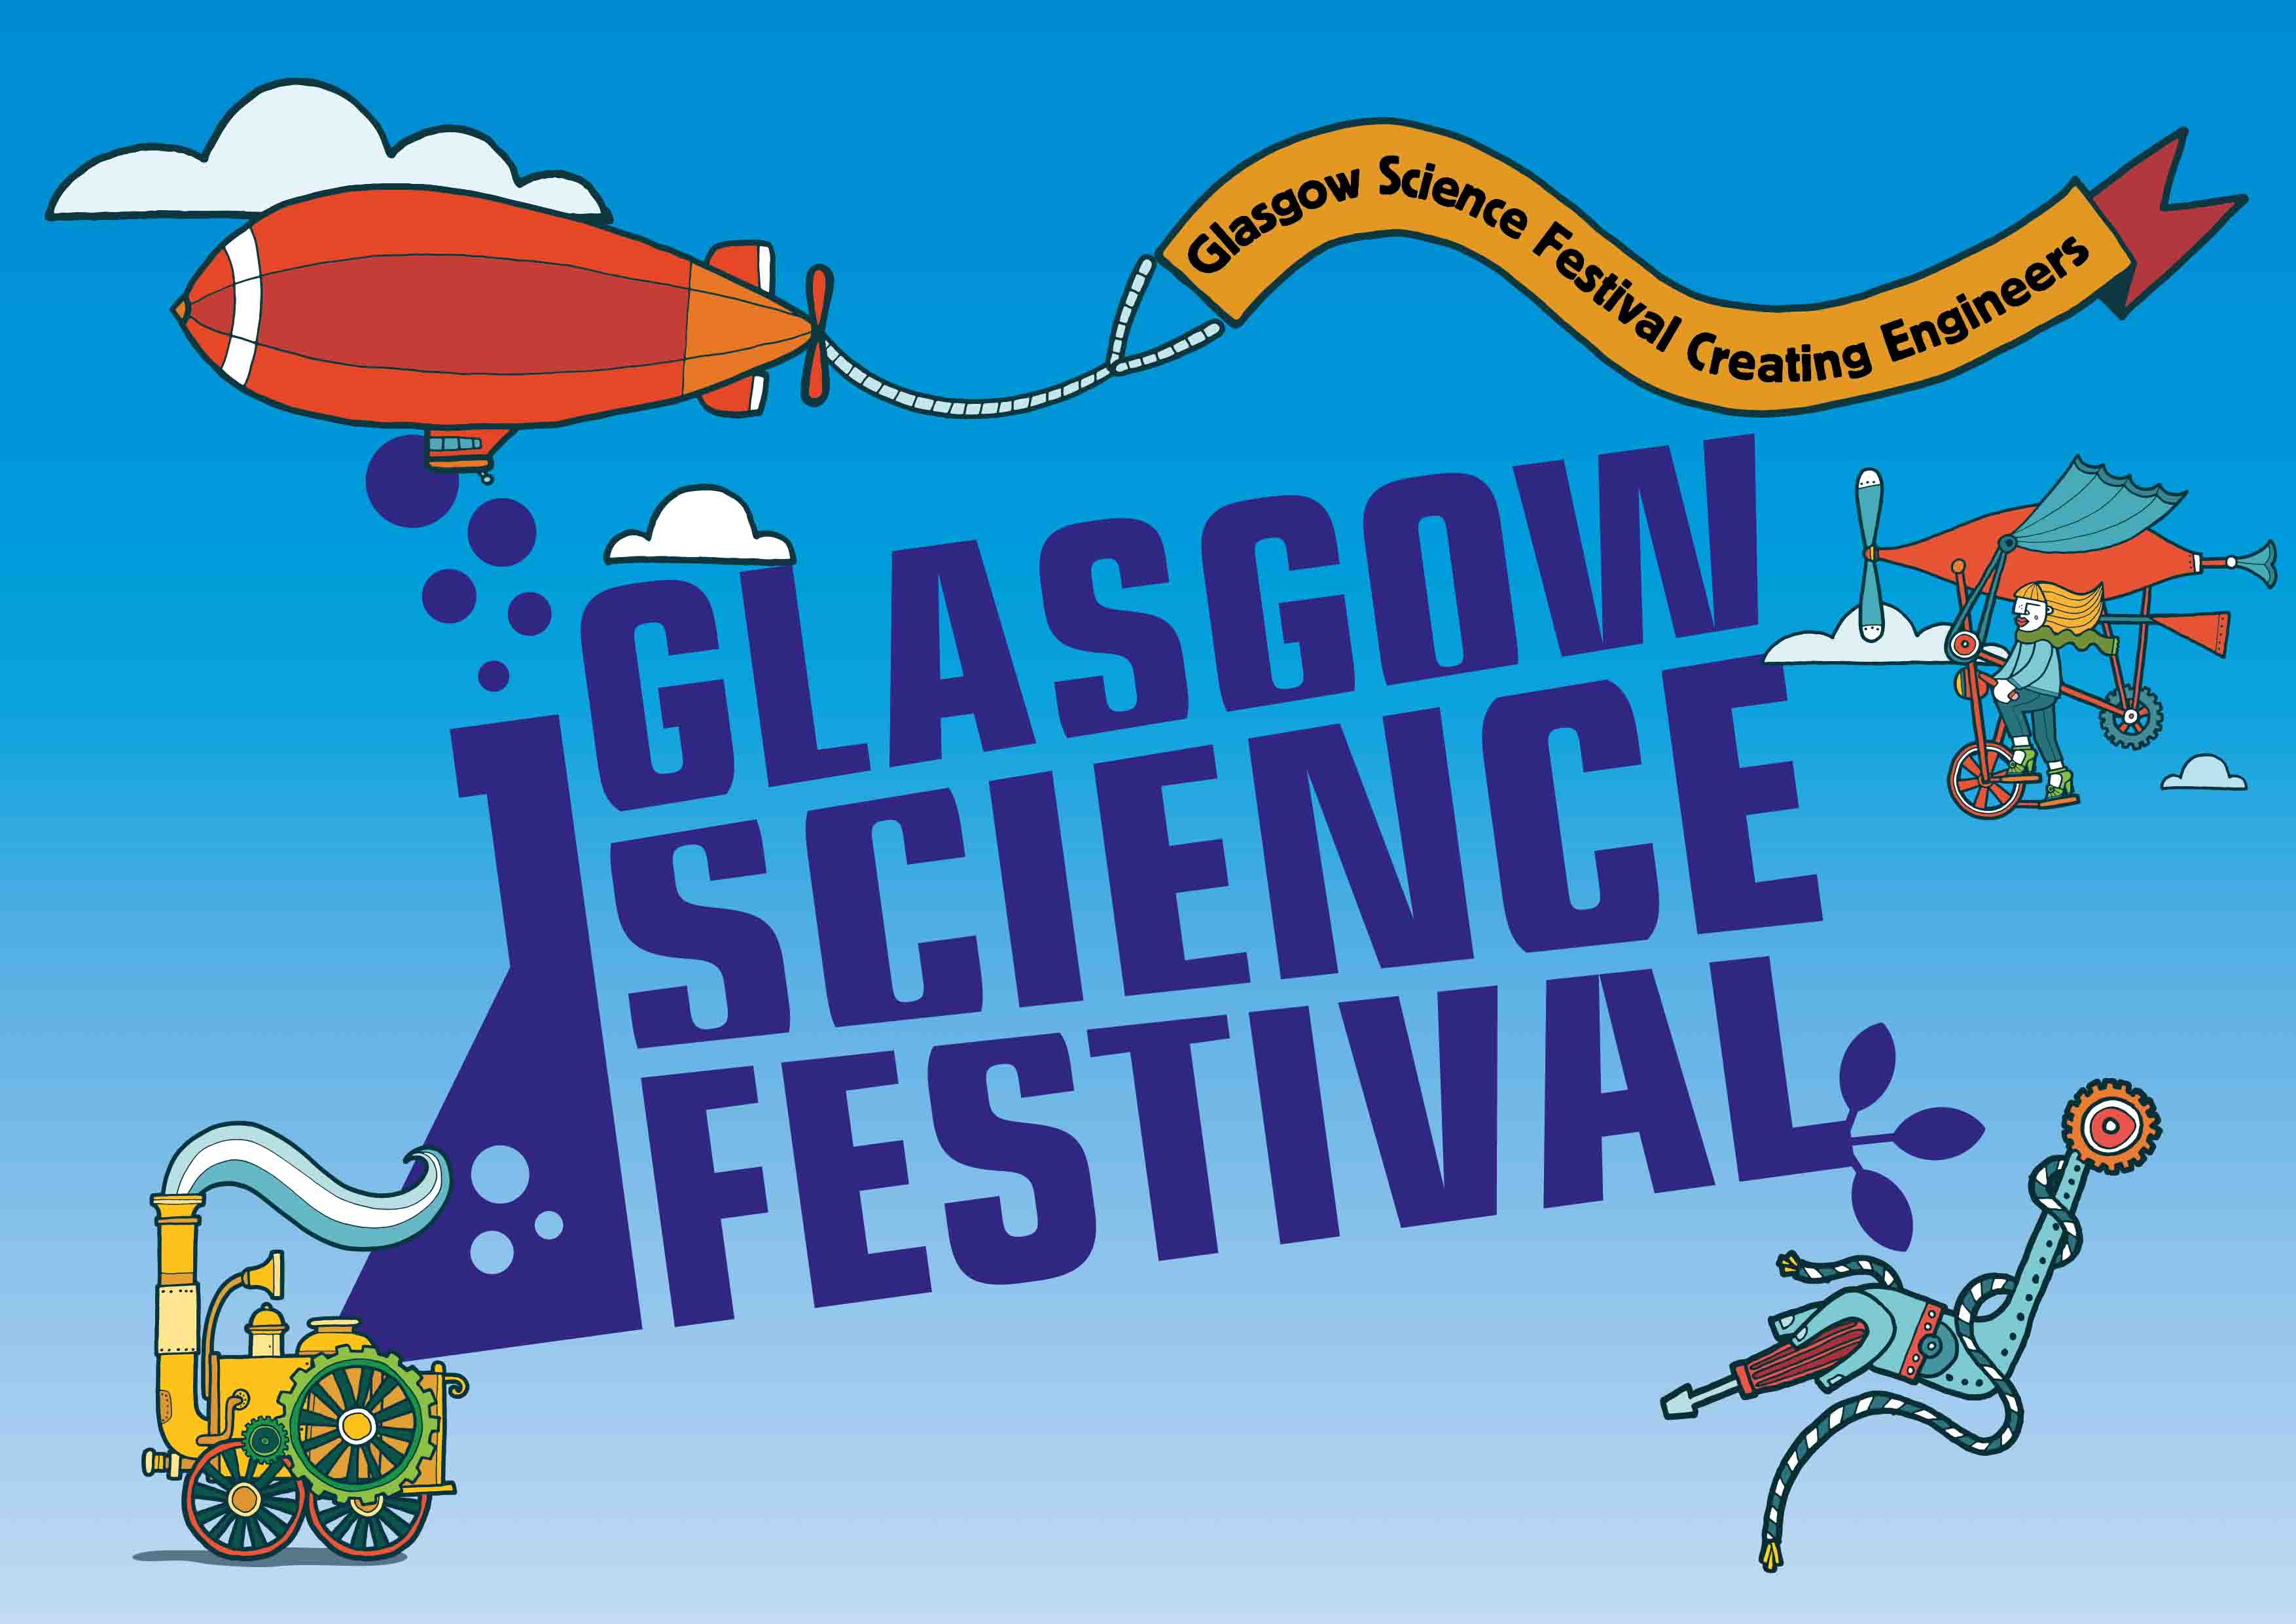 Image of the Glasgow Science Festival logo, above this is a cartoon plane with a banner that says 'Glasgow Science Festival Creating Engineers'. Below the logo is a cartoon robot arm and steam train and a cartoon lady on a pedalow in the air. 